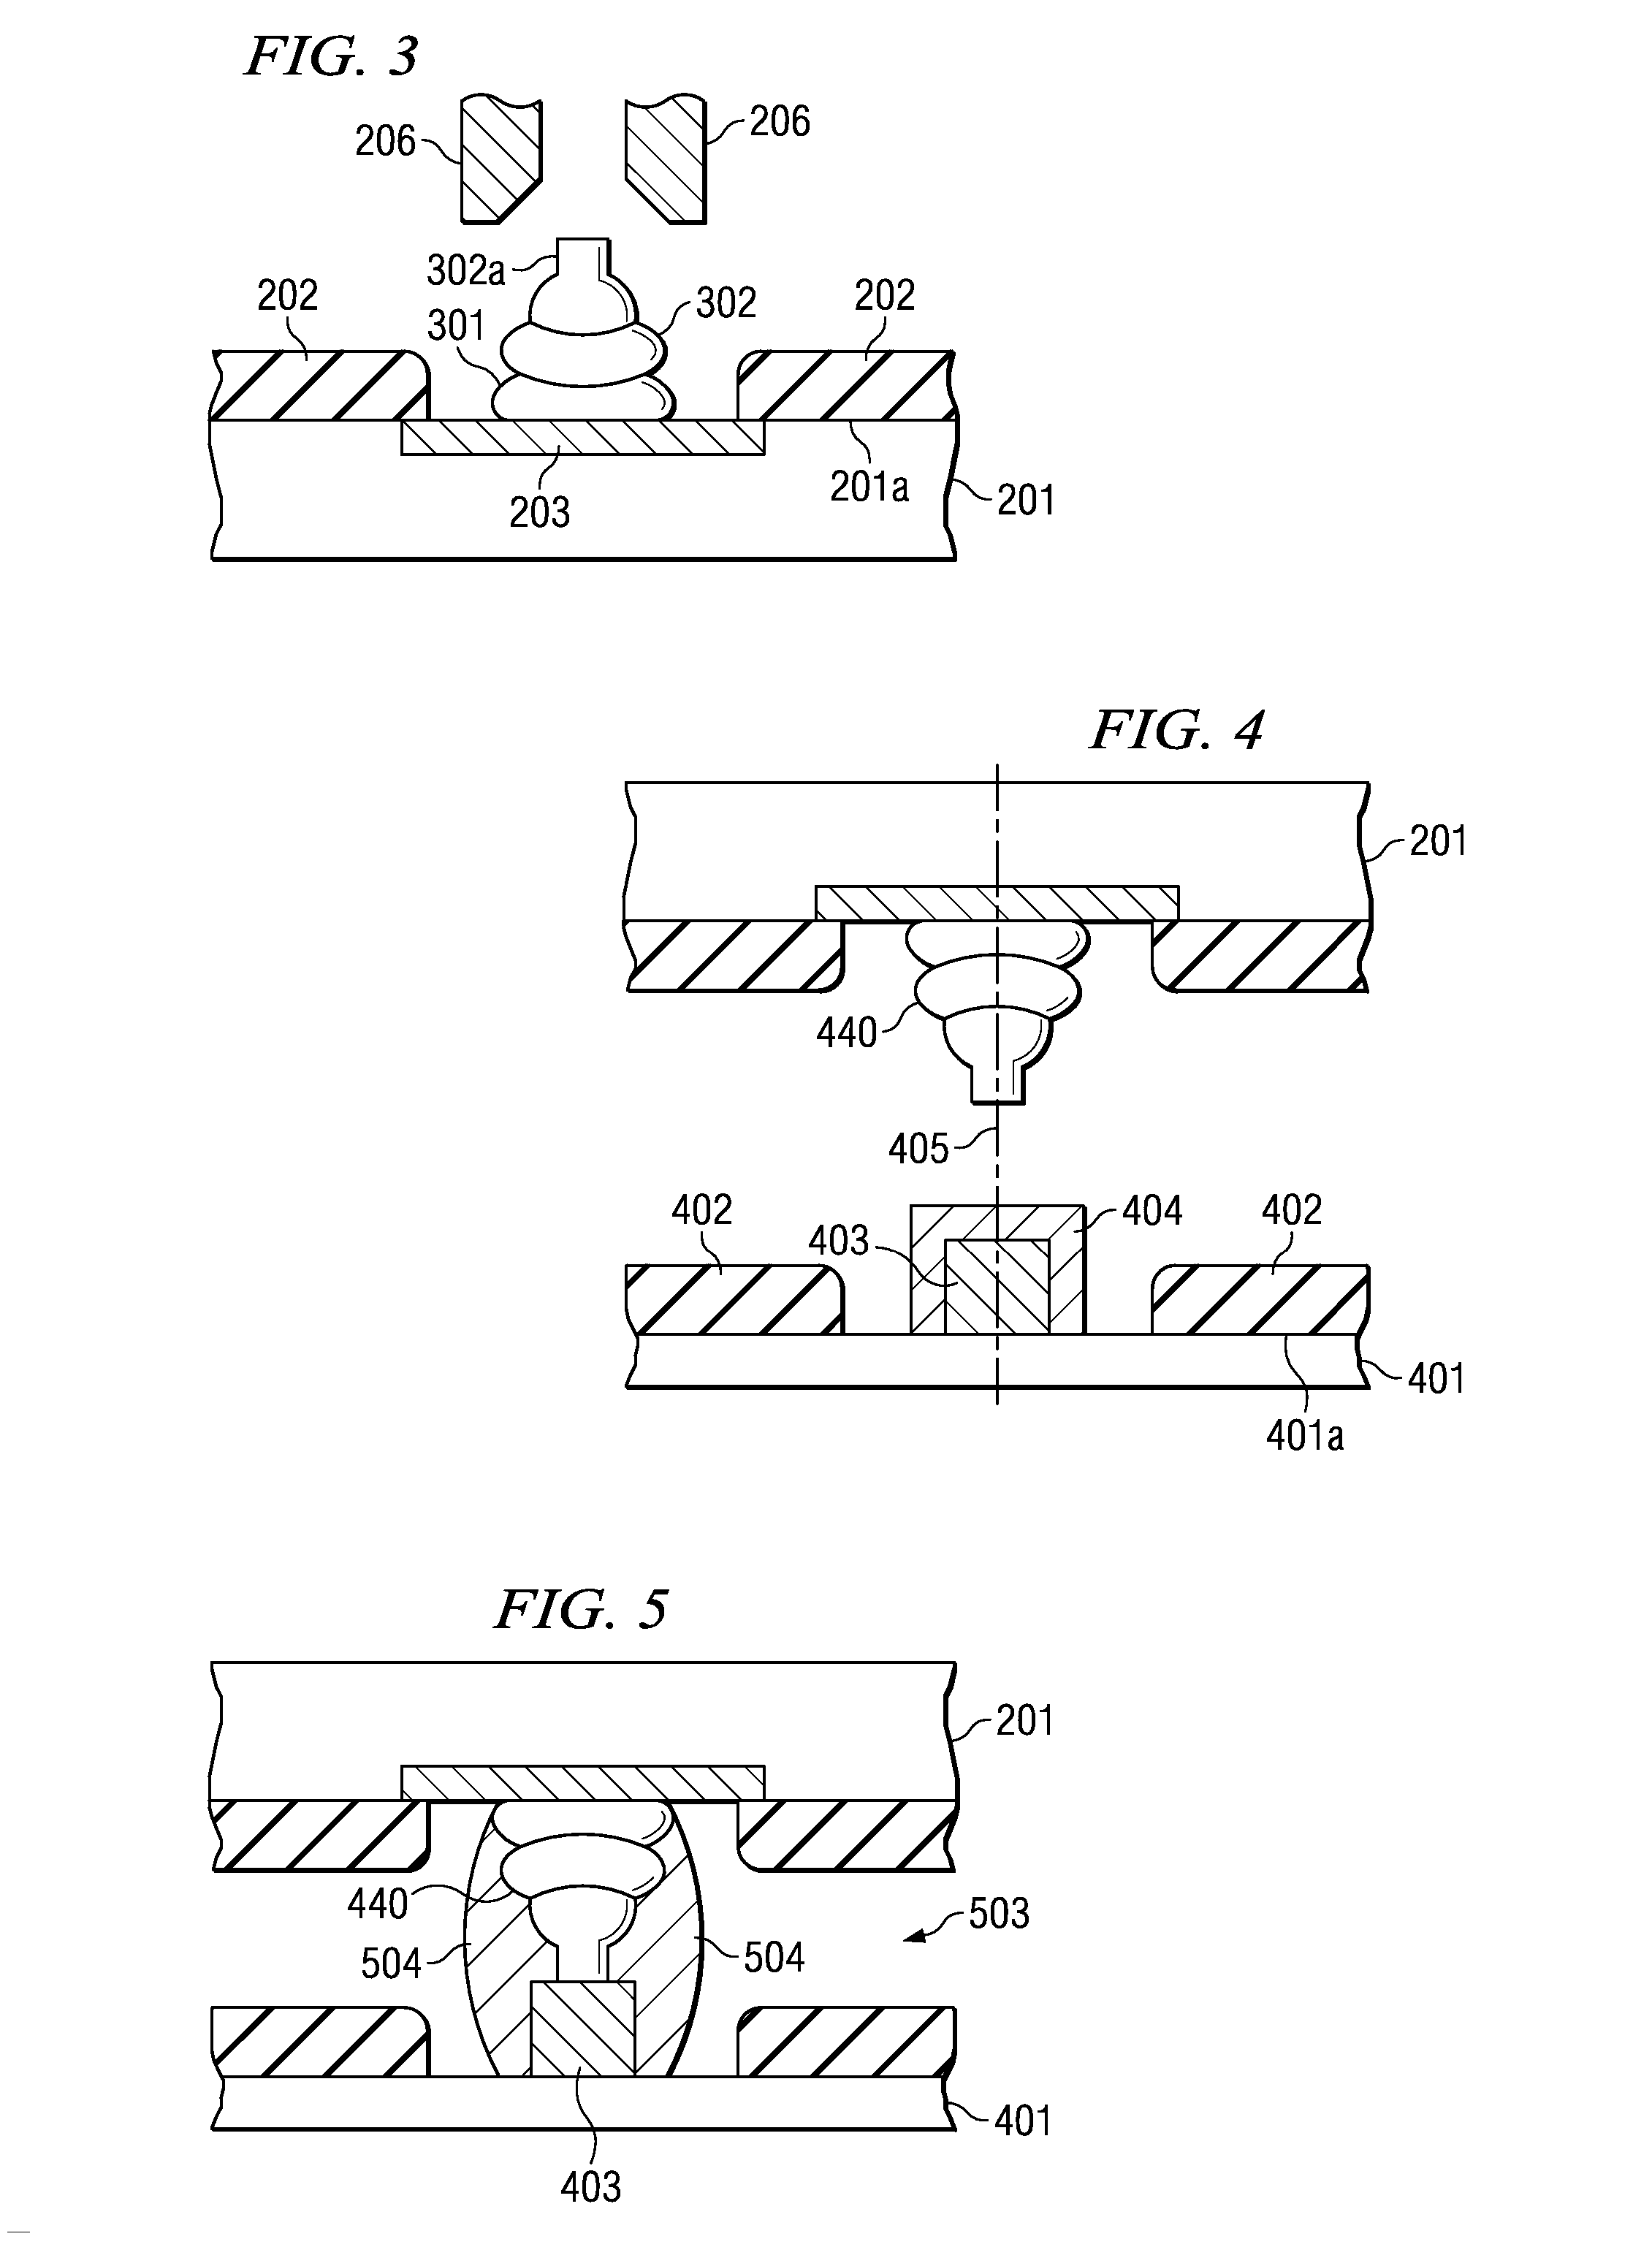 Flip-Chip Device Having Underfill in Controlled Gap